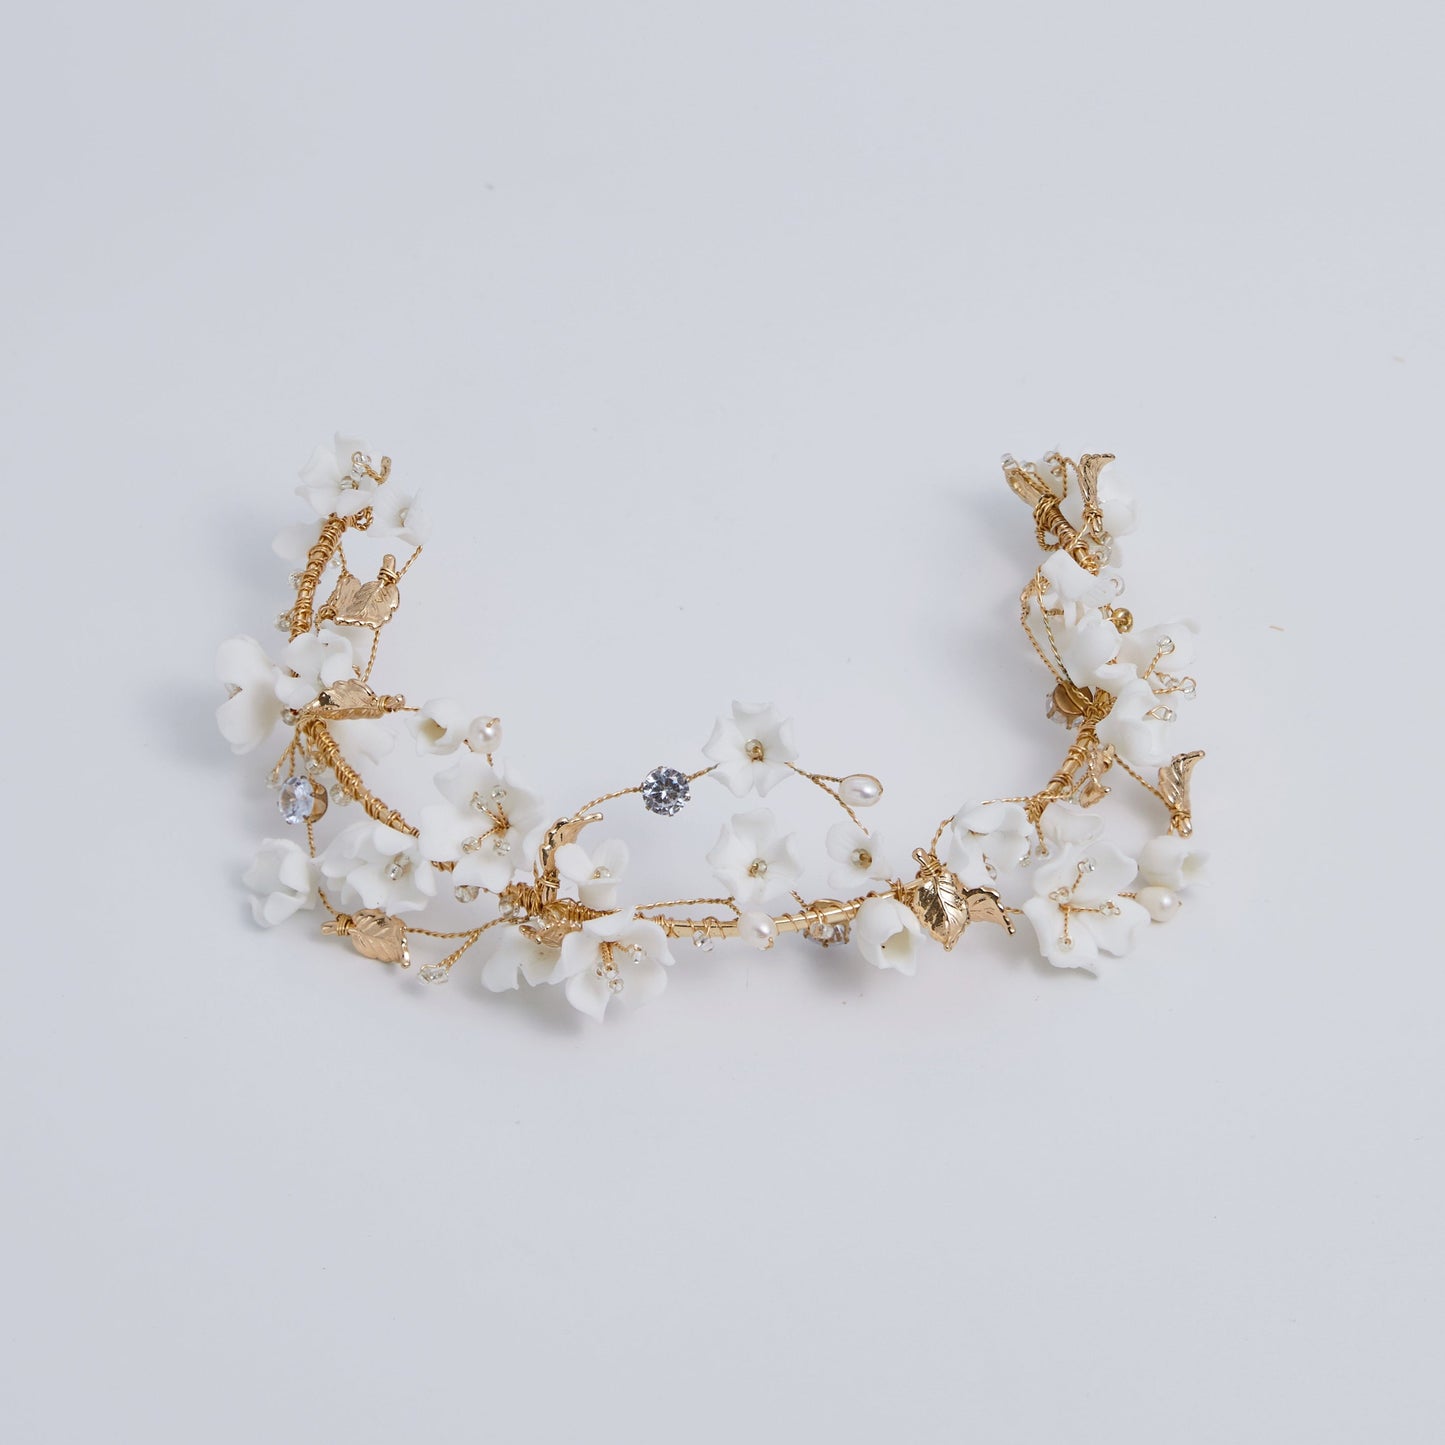 This beautifully hand-sculpted clay & pearl crown features individually crafted cherry blossom flowers, dainty freshwater pearls, and crystals. The result is a full, textured headband that makes a statement while remaining incredibly feminine.